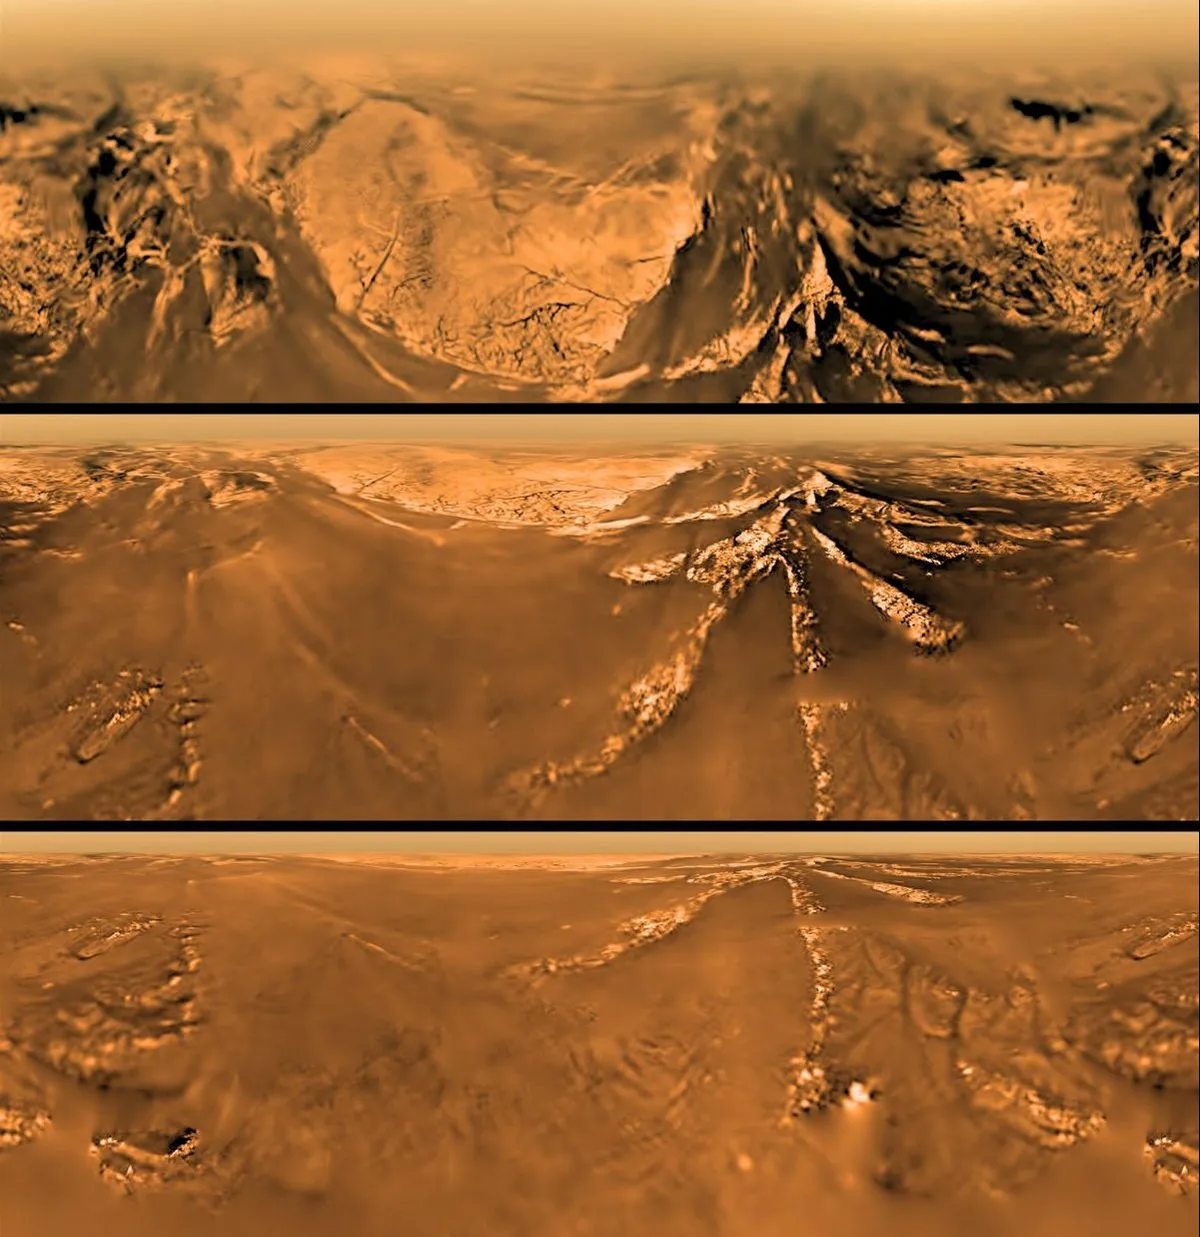 Views of Titan’s surface as seen by the Huygens lander during its descent onto the surface of the icy moon, 14 January 2005. Credit: ESA/NASA/JPL/University of Arizona